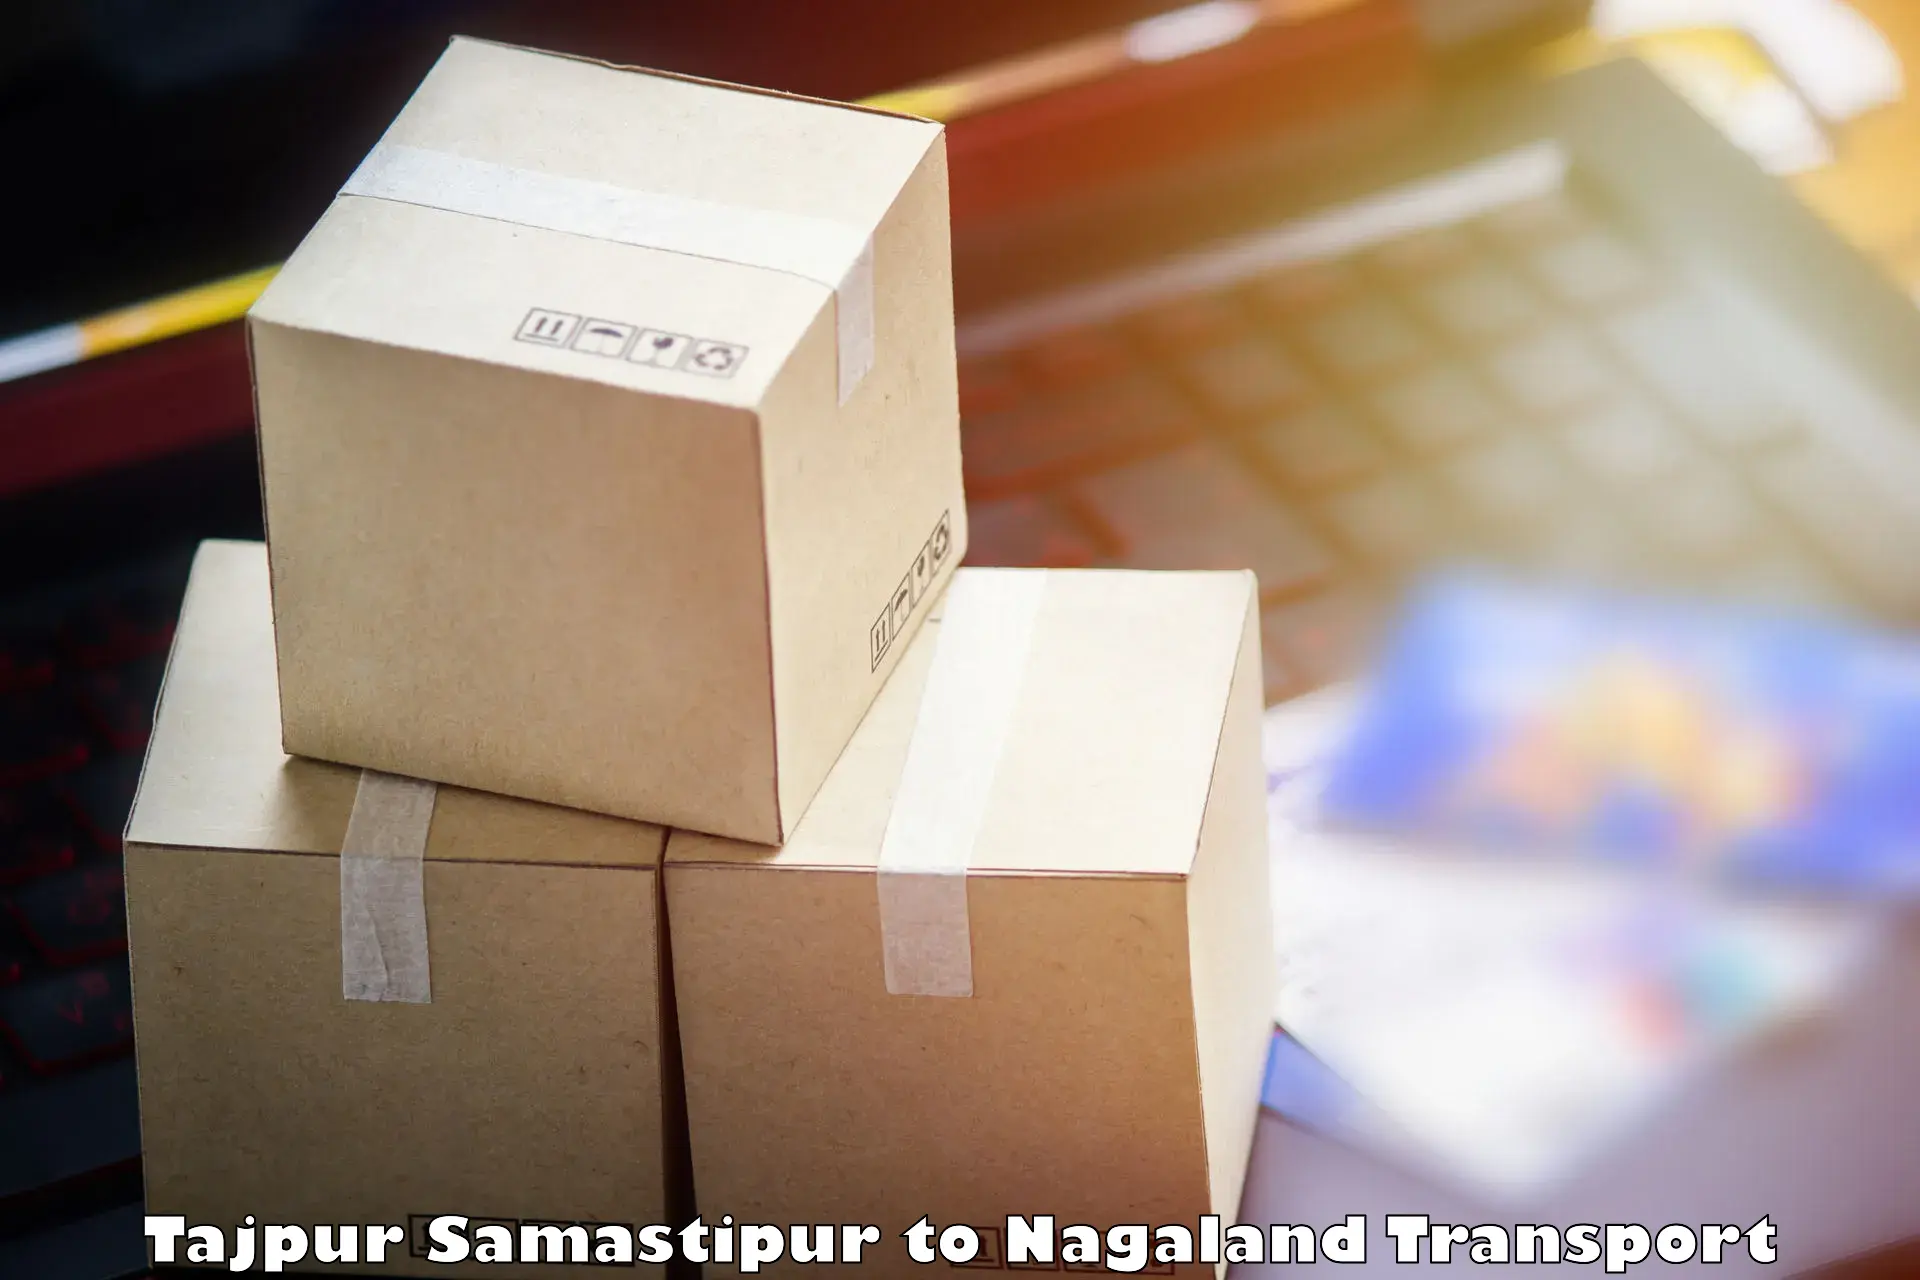 Package delivery services Tajpur Samastipur to Nagaland